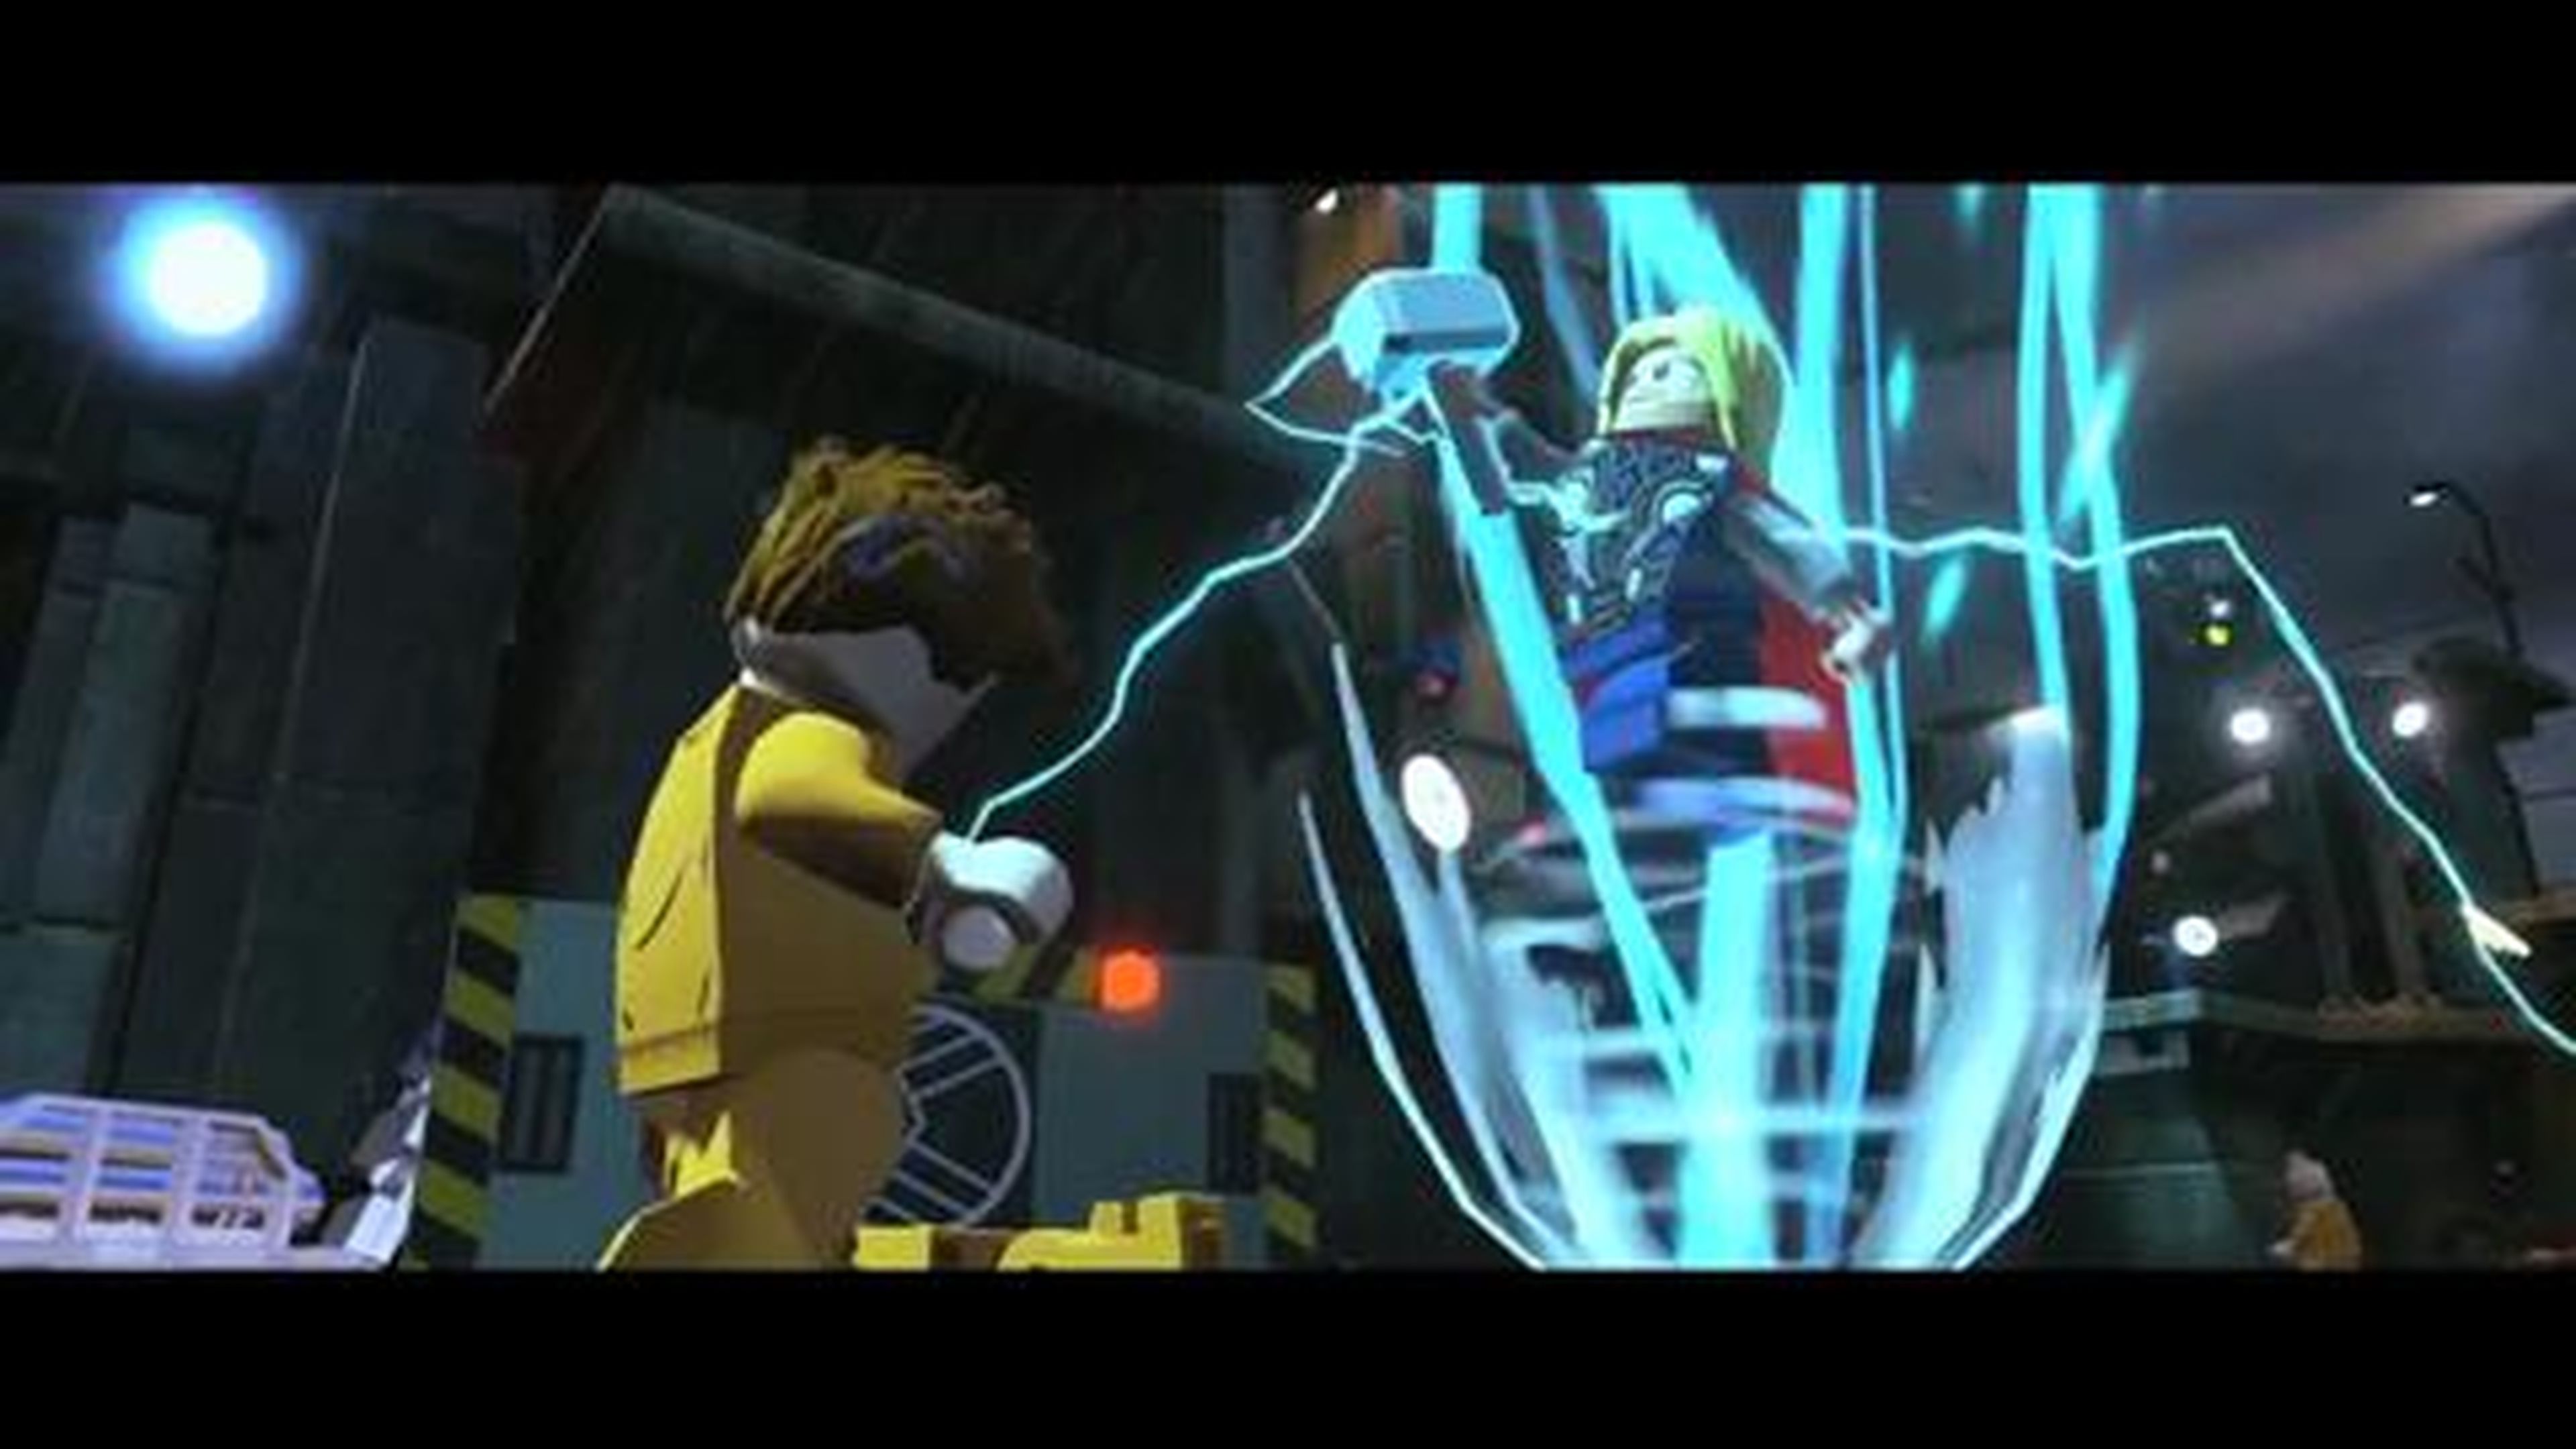 Lego Marvel Super Heroes - Thor Trailer - PS4 Xbox One PS3 Xbox360 PC WiiU 3DS PC PS Vita